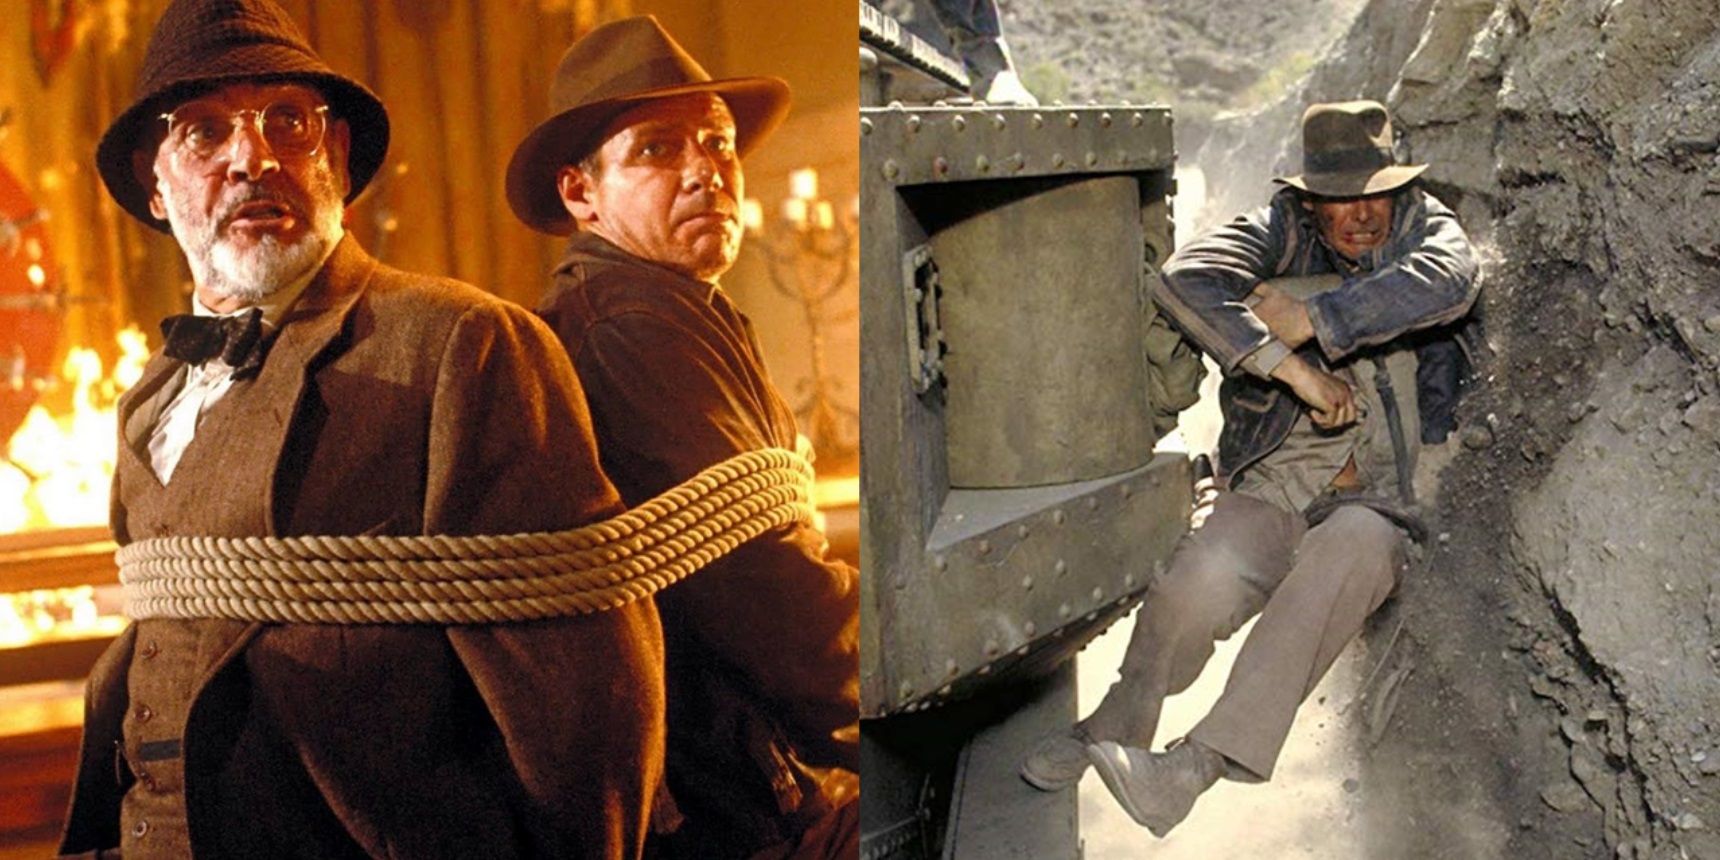 Split image of Indy and Henry Sr in a burning castle and Indy hanging from a tank in Indiana Jones and the Last Crusade